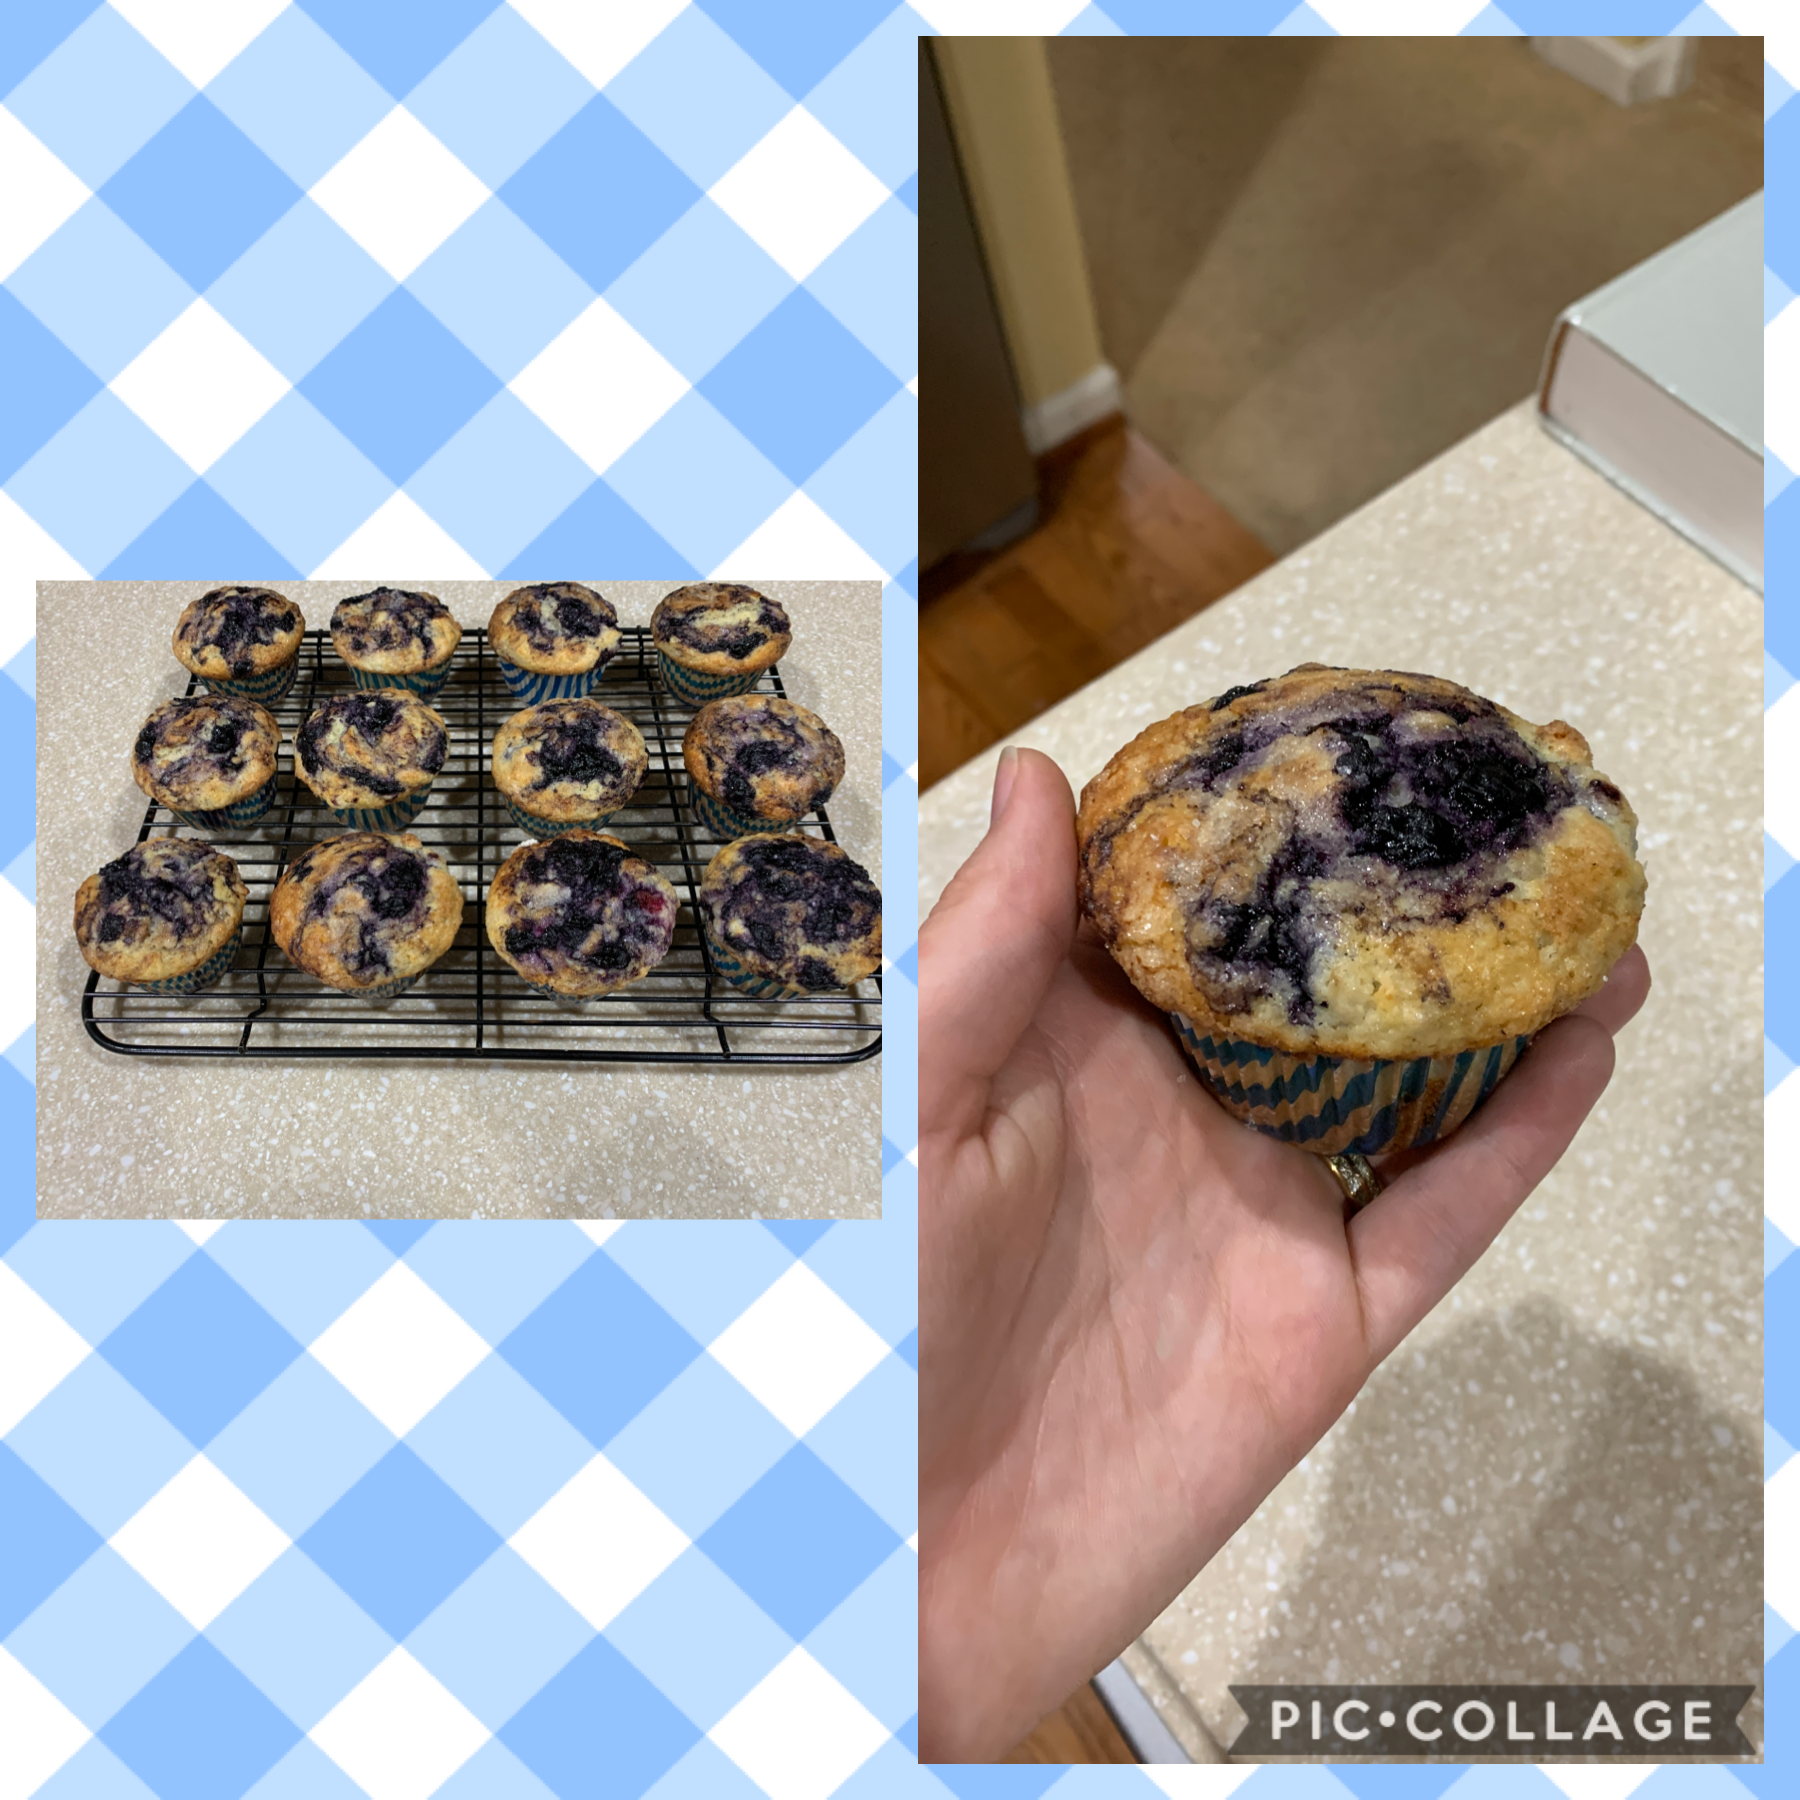 Next up - blueberry muffins swirled with homemade blueberry jam and topped with lemon sugar 